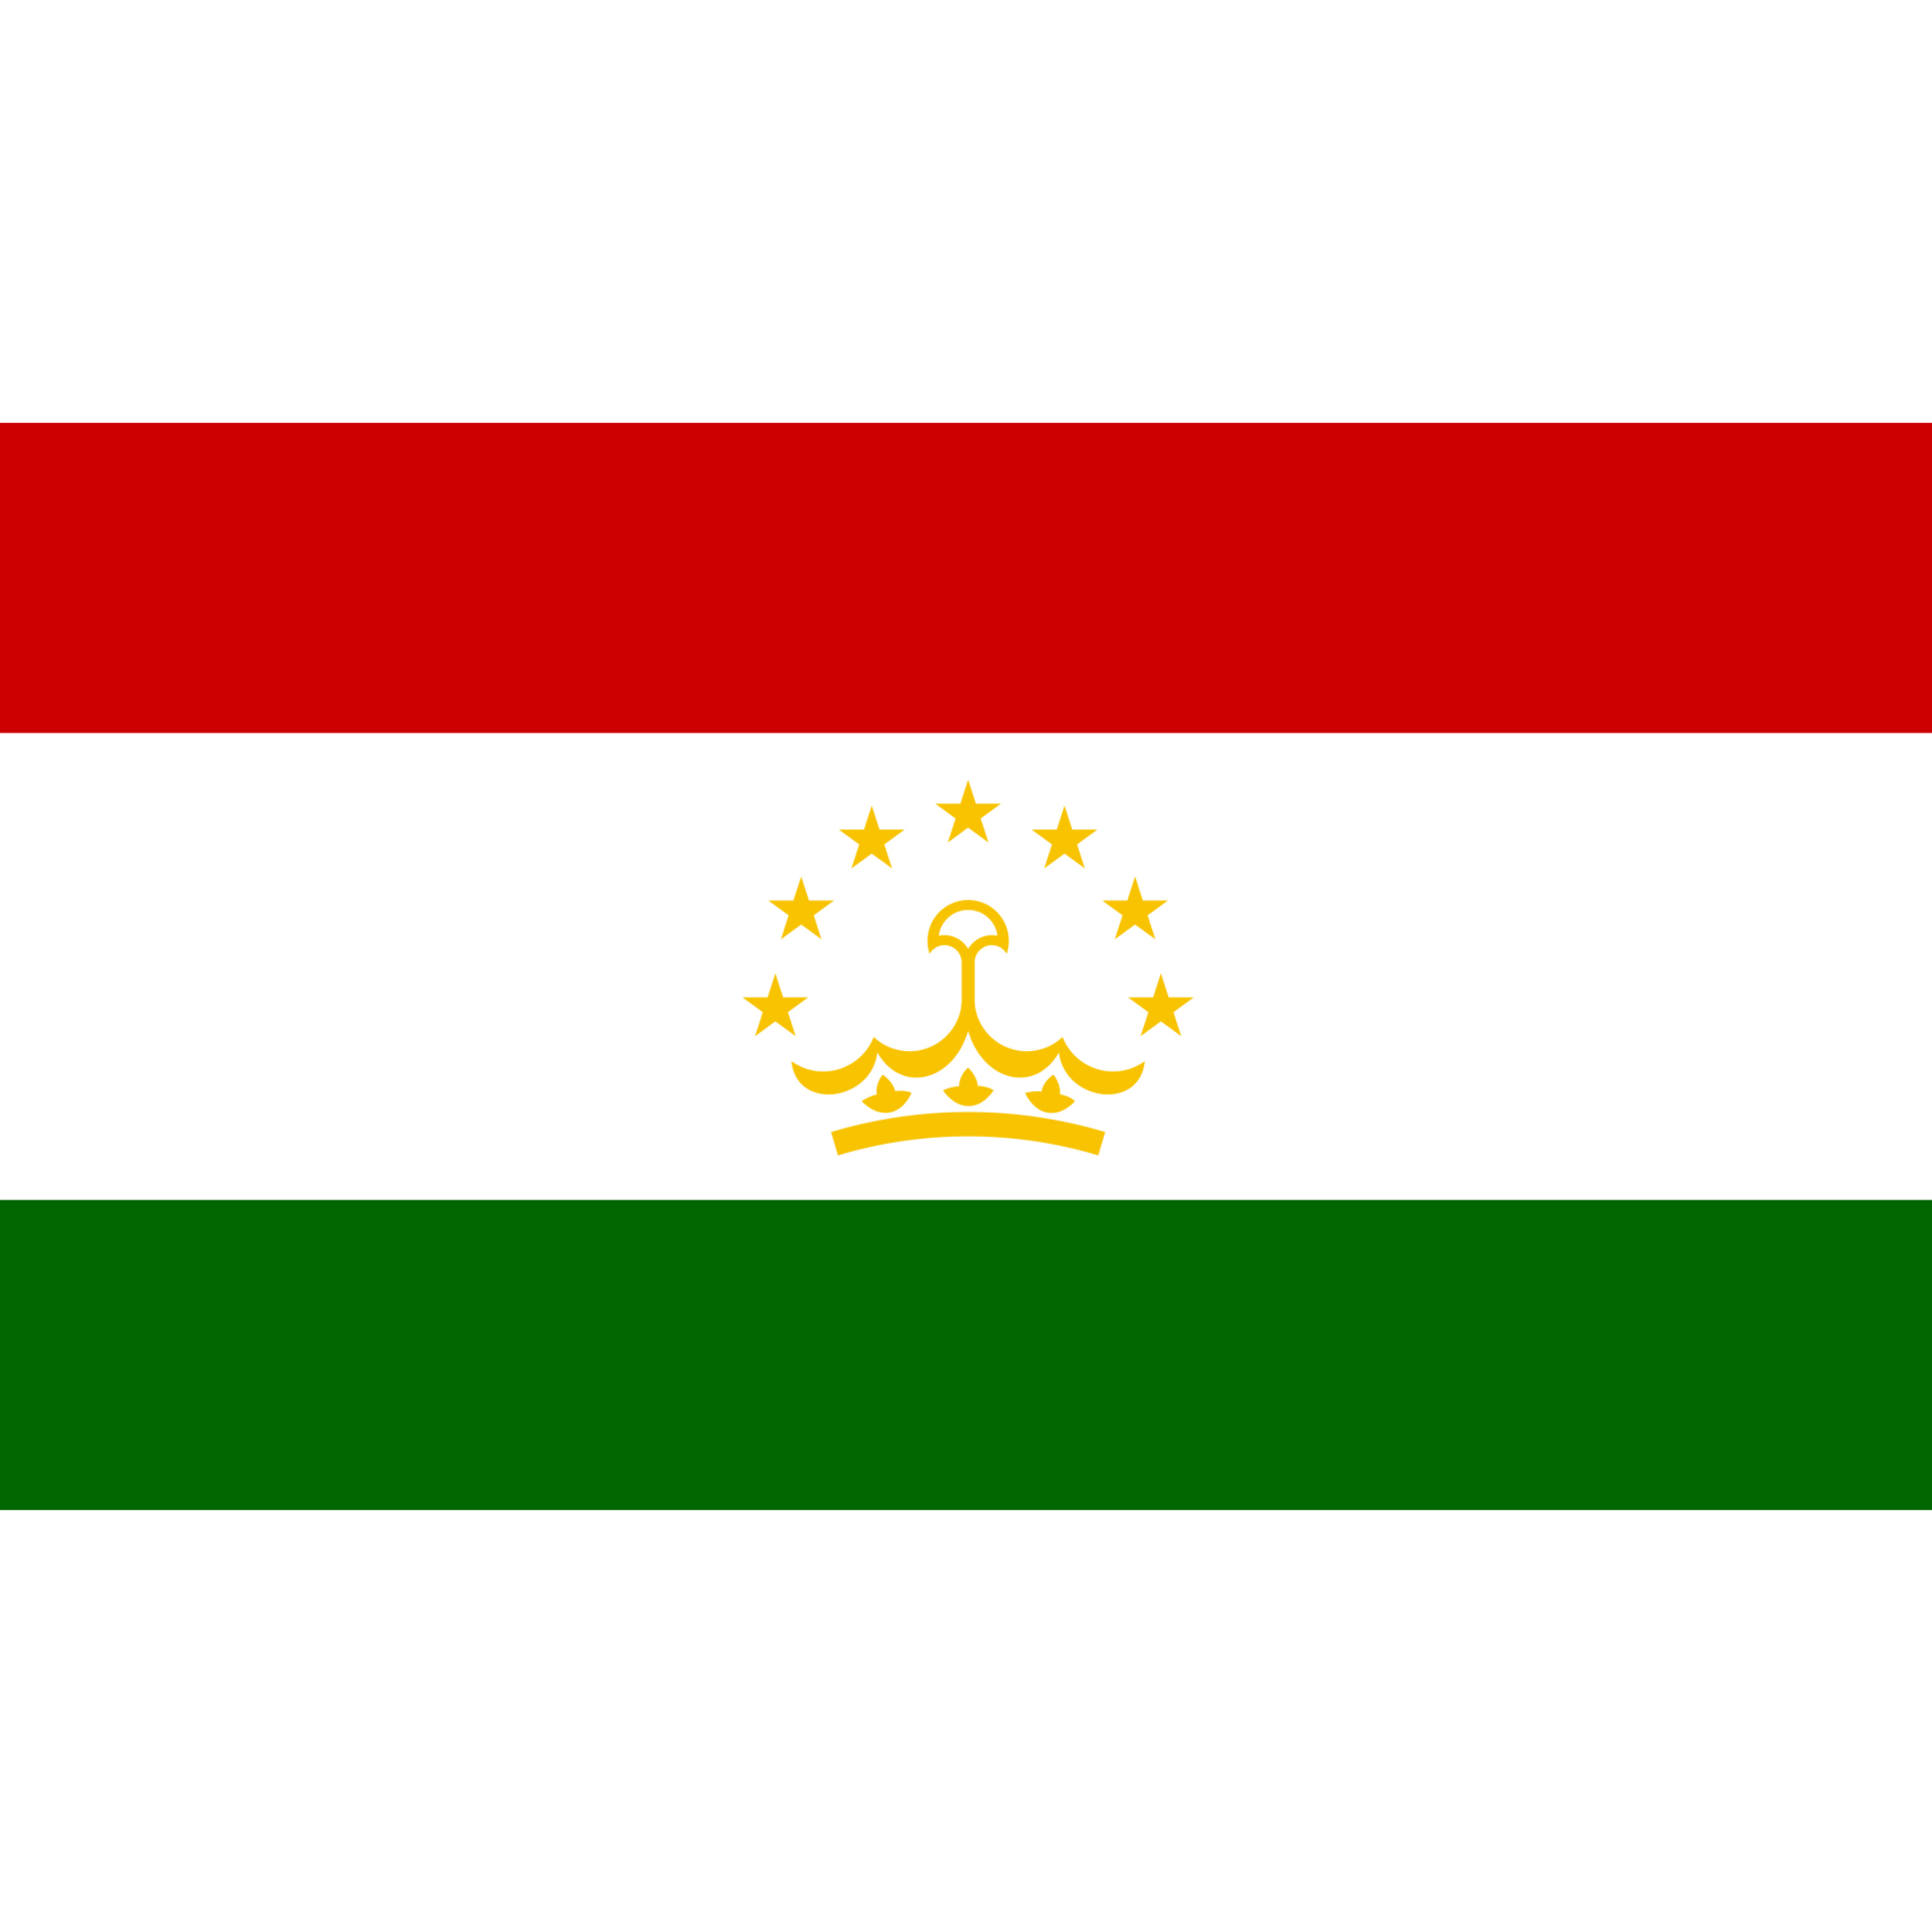 The Tajikistan flag has 3 horizontal red, white and green bands with a yellow crown and arc of seven stars at the centre.